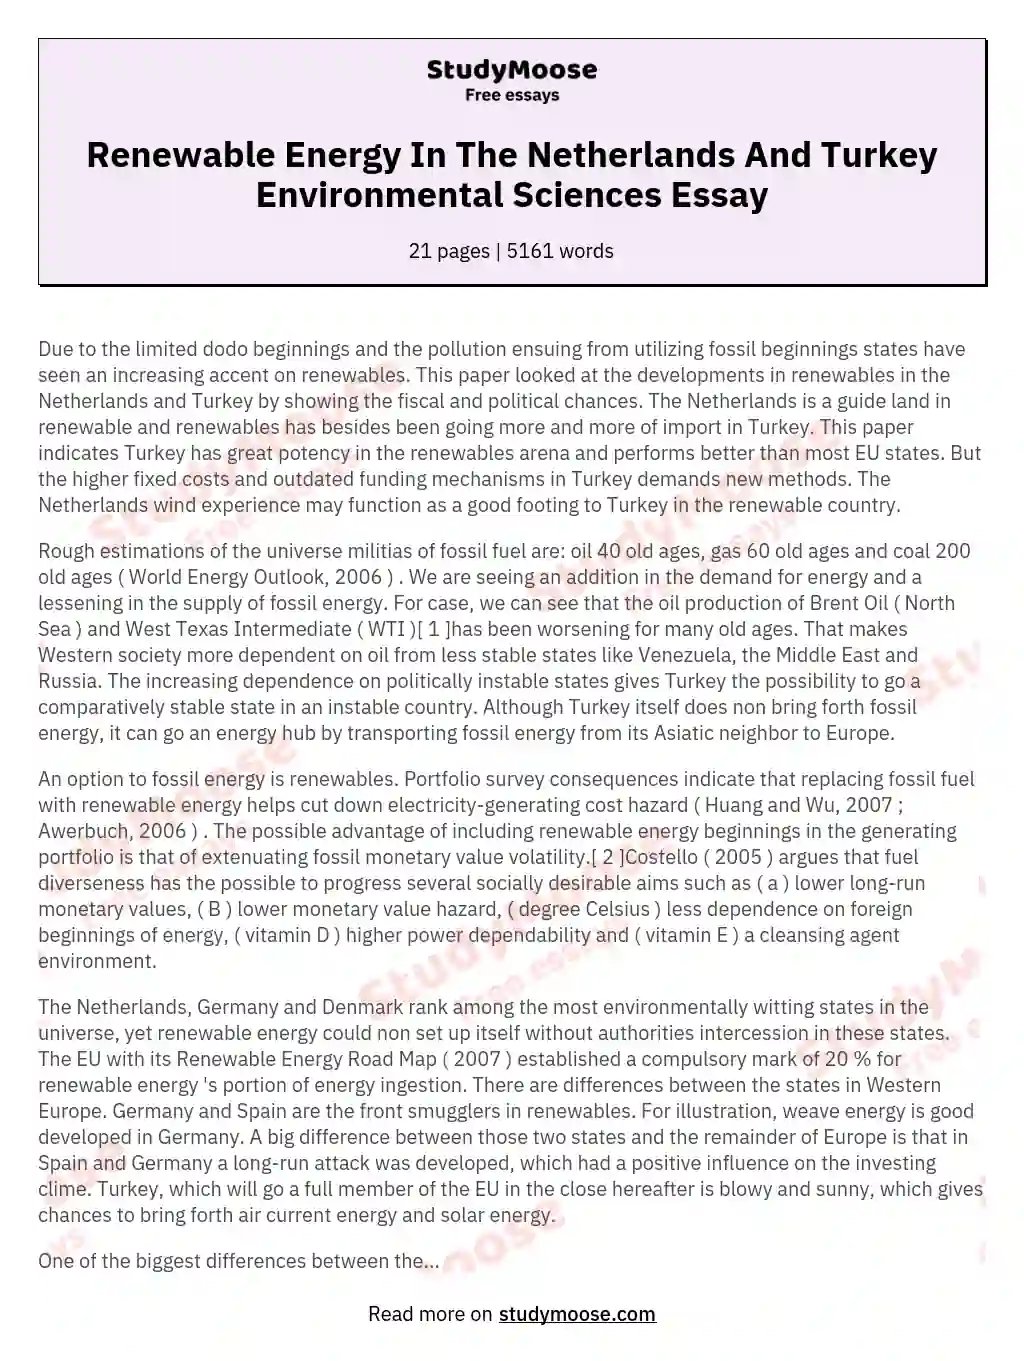 Renewable Energy In The Netherlands And Turkey Environmental Sciences Essay